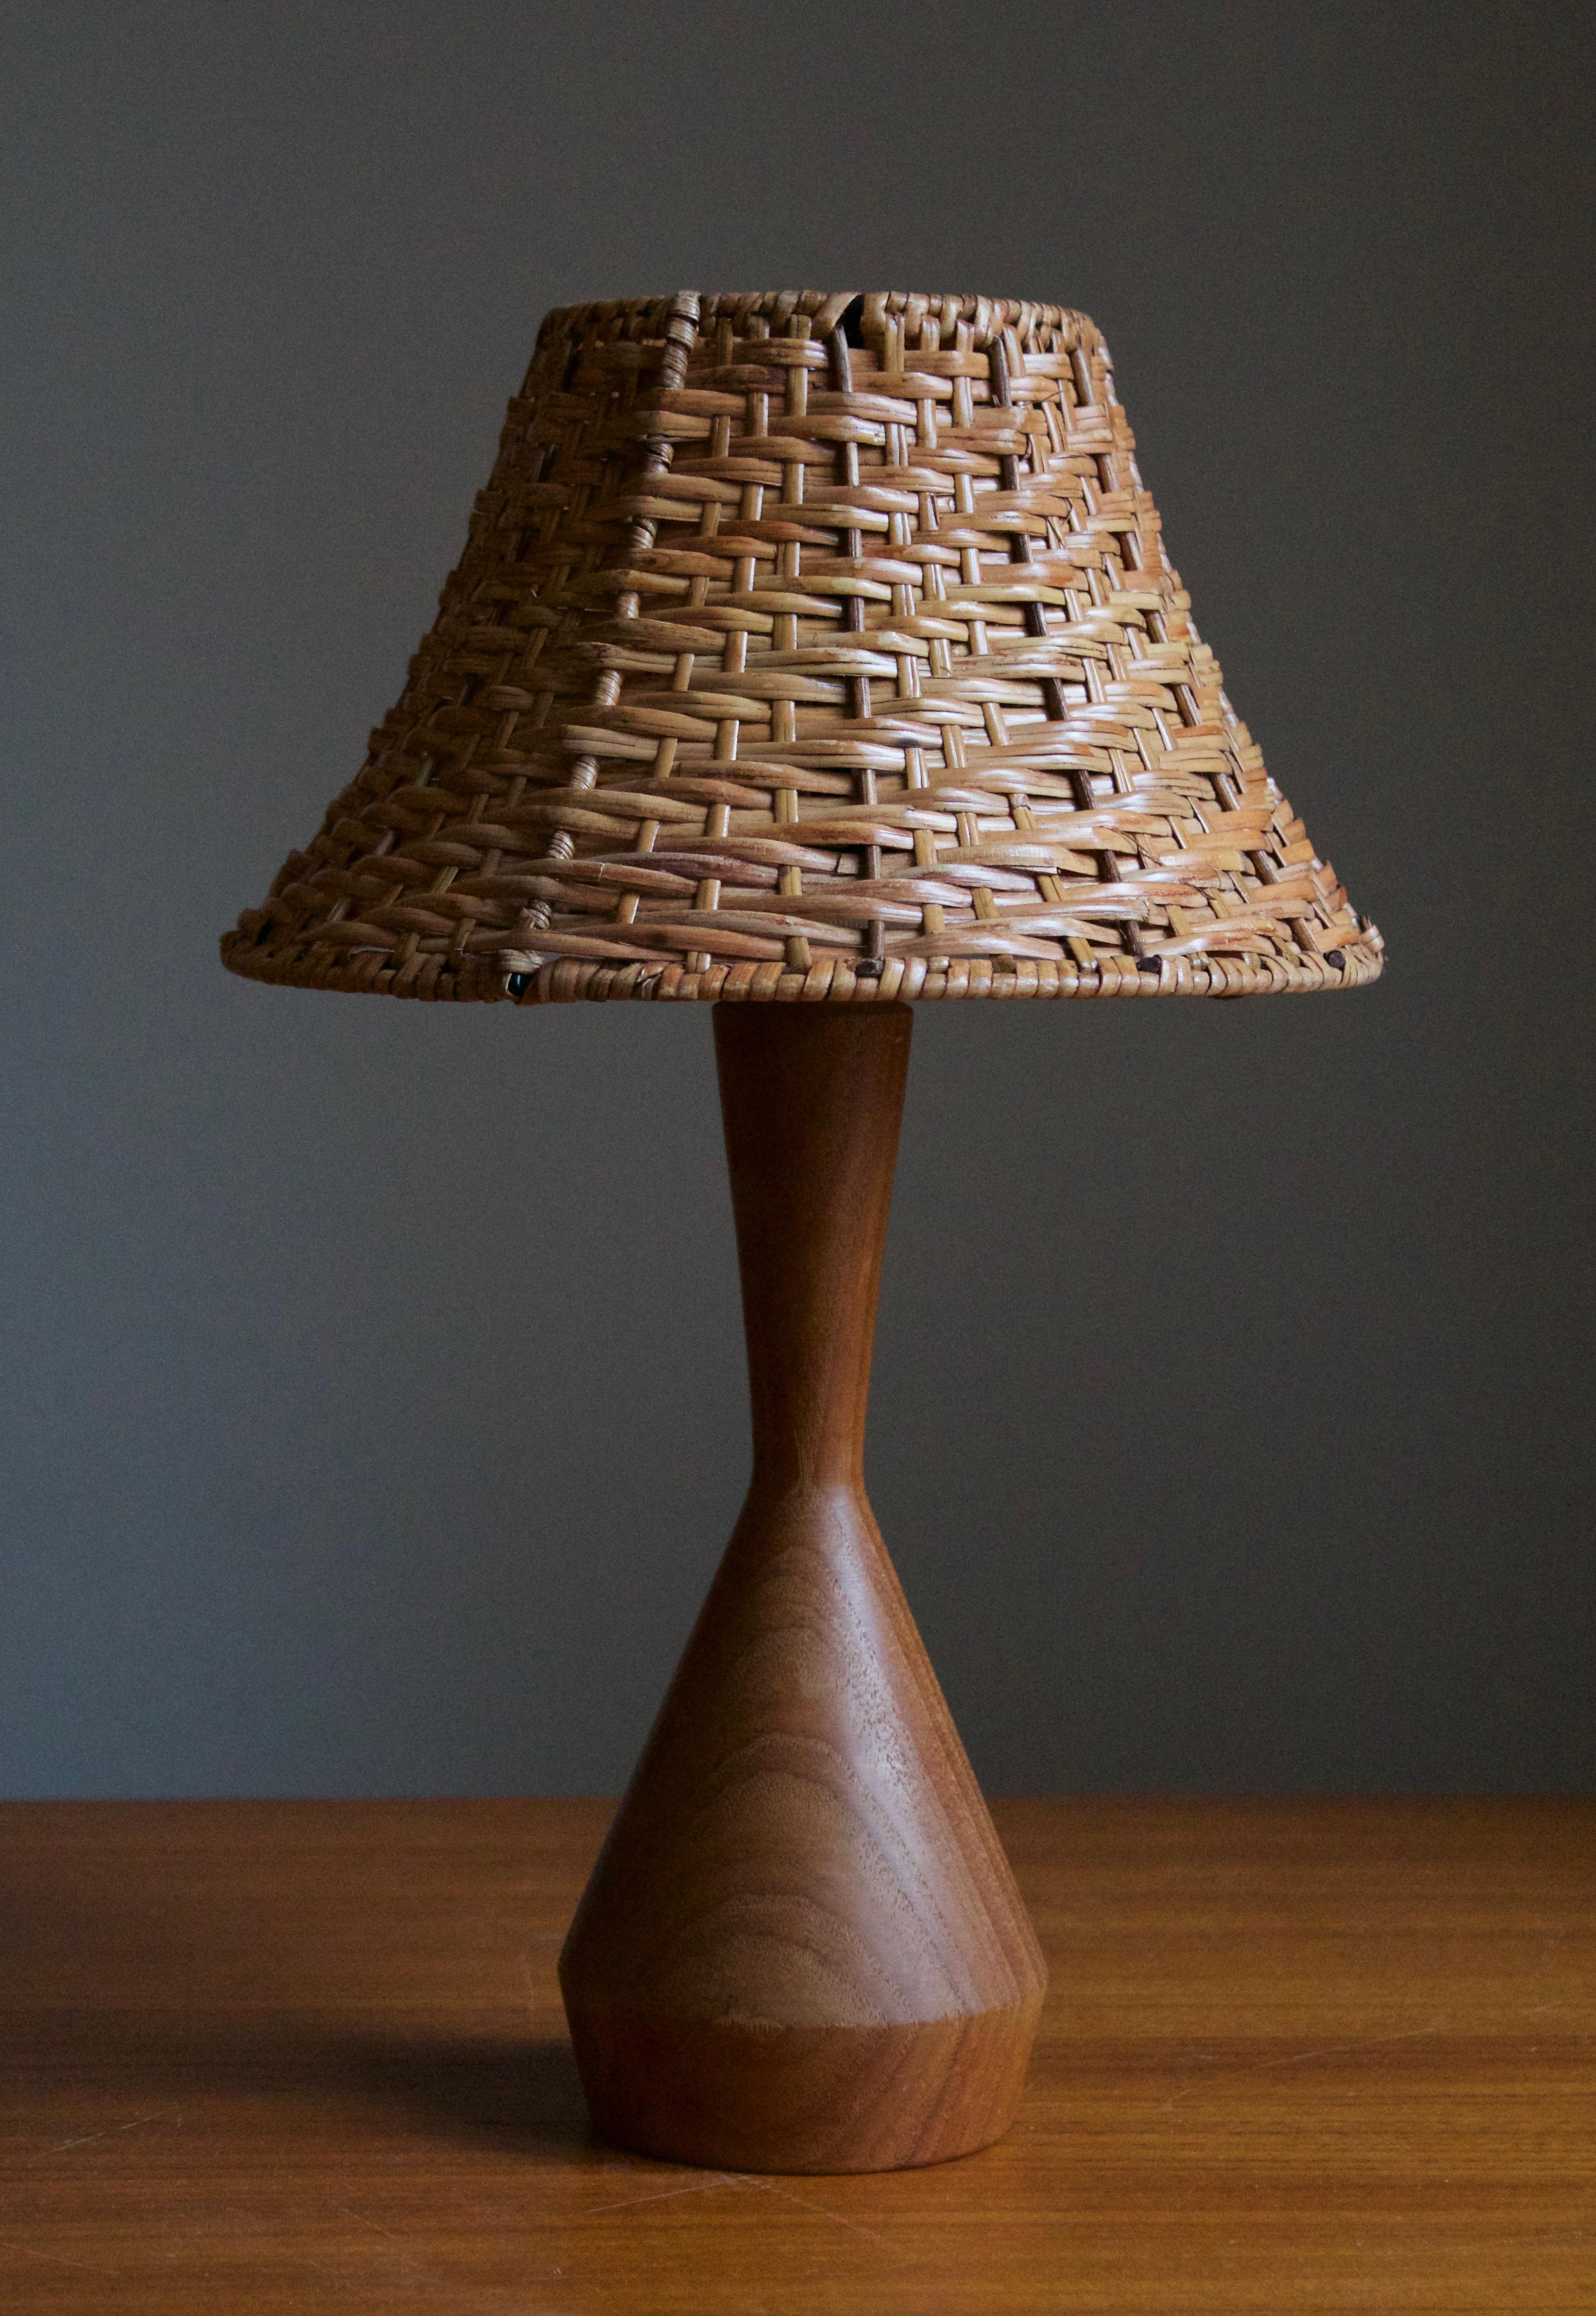 A table lamp designed and produced in Sweden in, c. 1960s.

Stated dimensions exclude lampshade, height includes the socket, excludes harp. Assorted vintage lampshade can be included in purchase upon request.